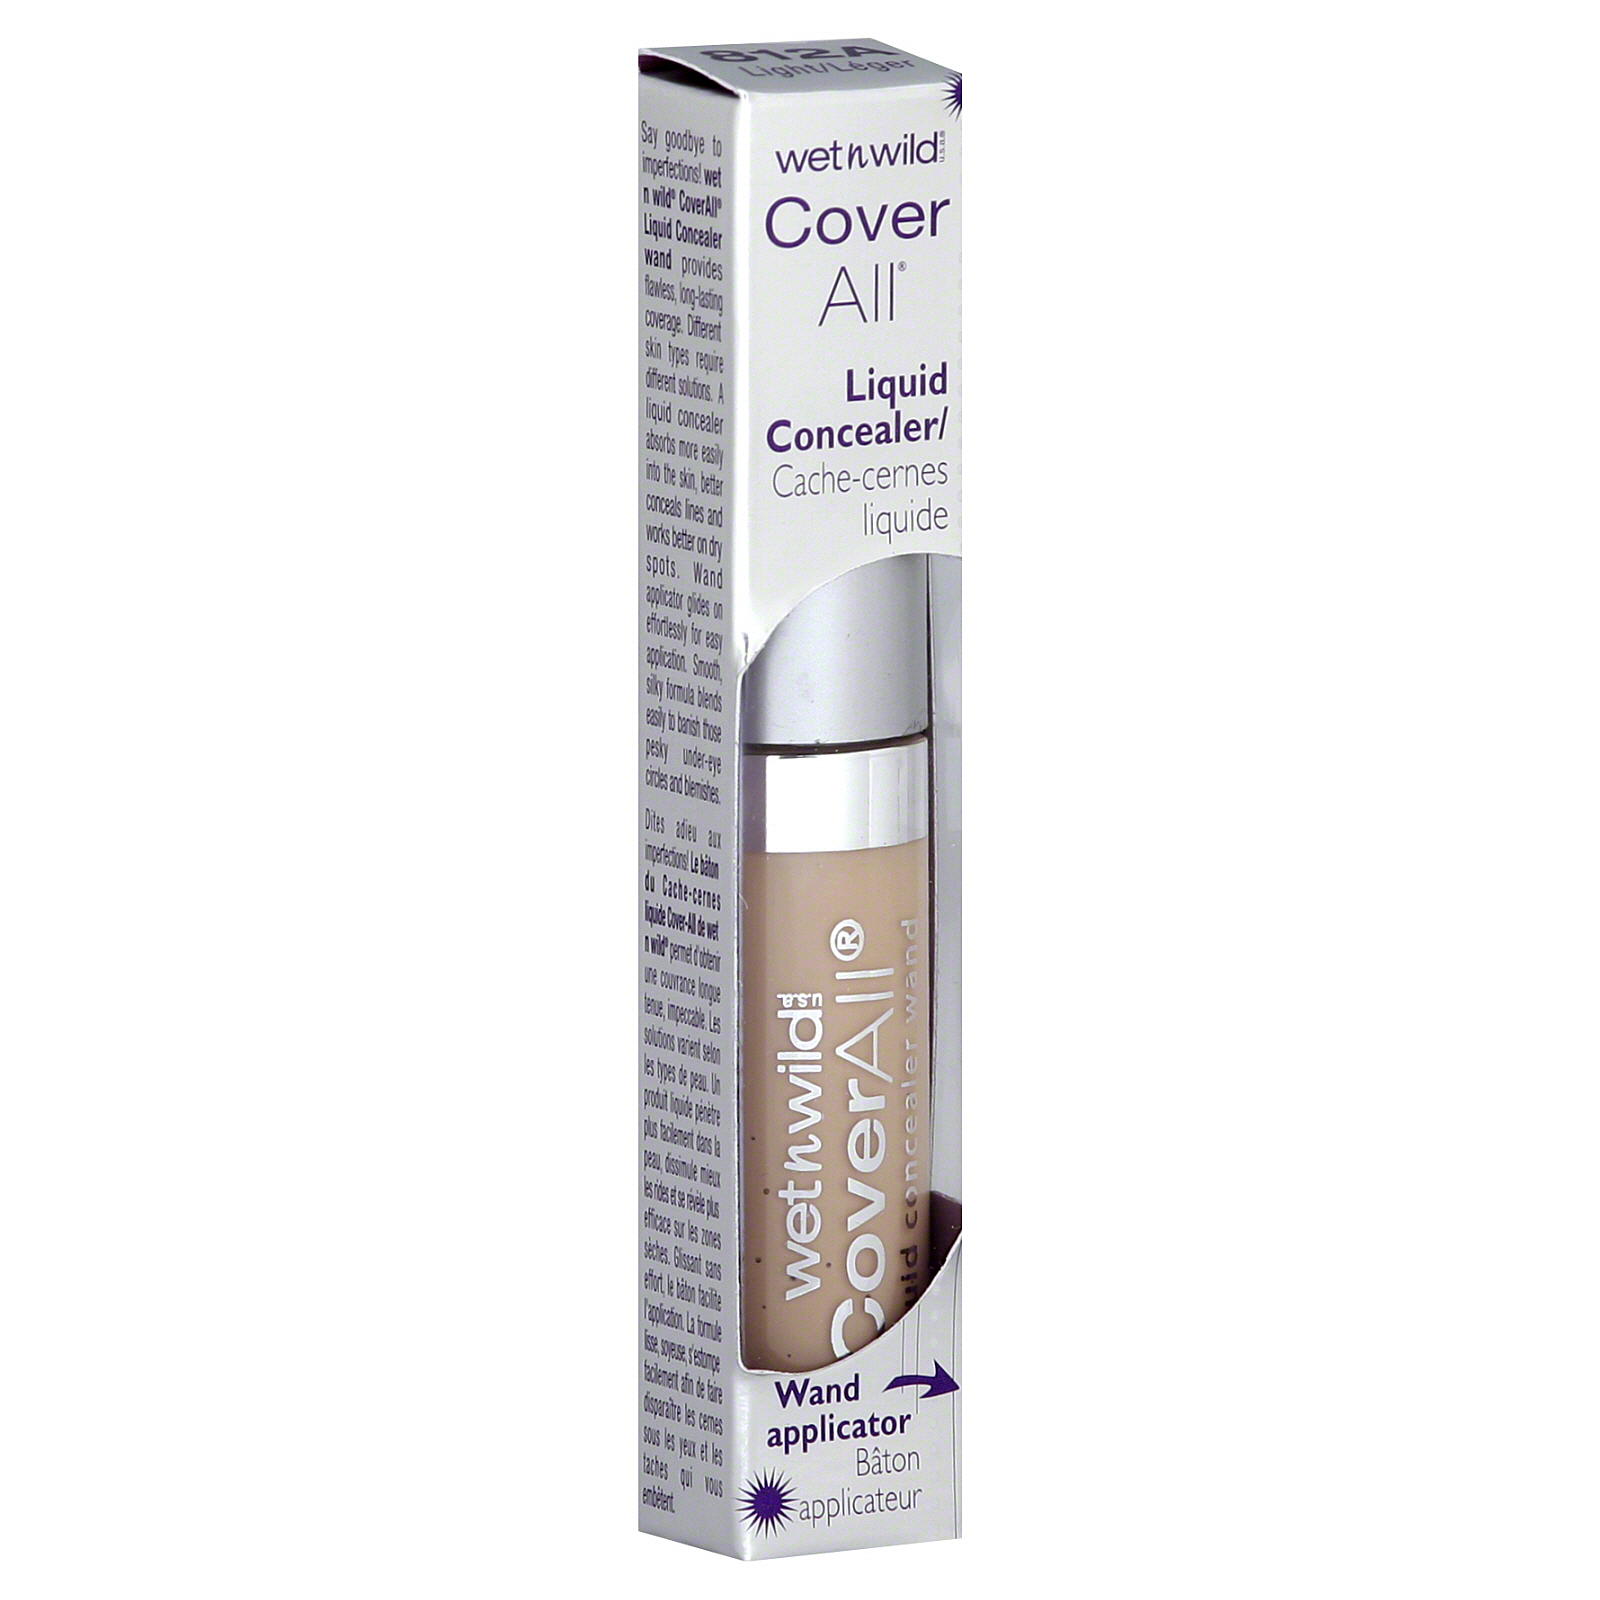 CoverAll Liquid Concealer Wand